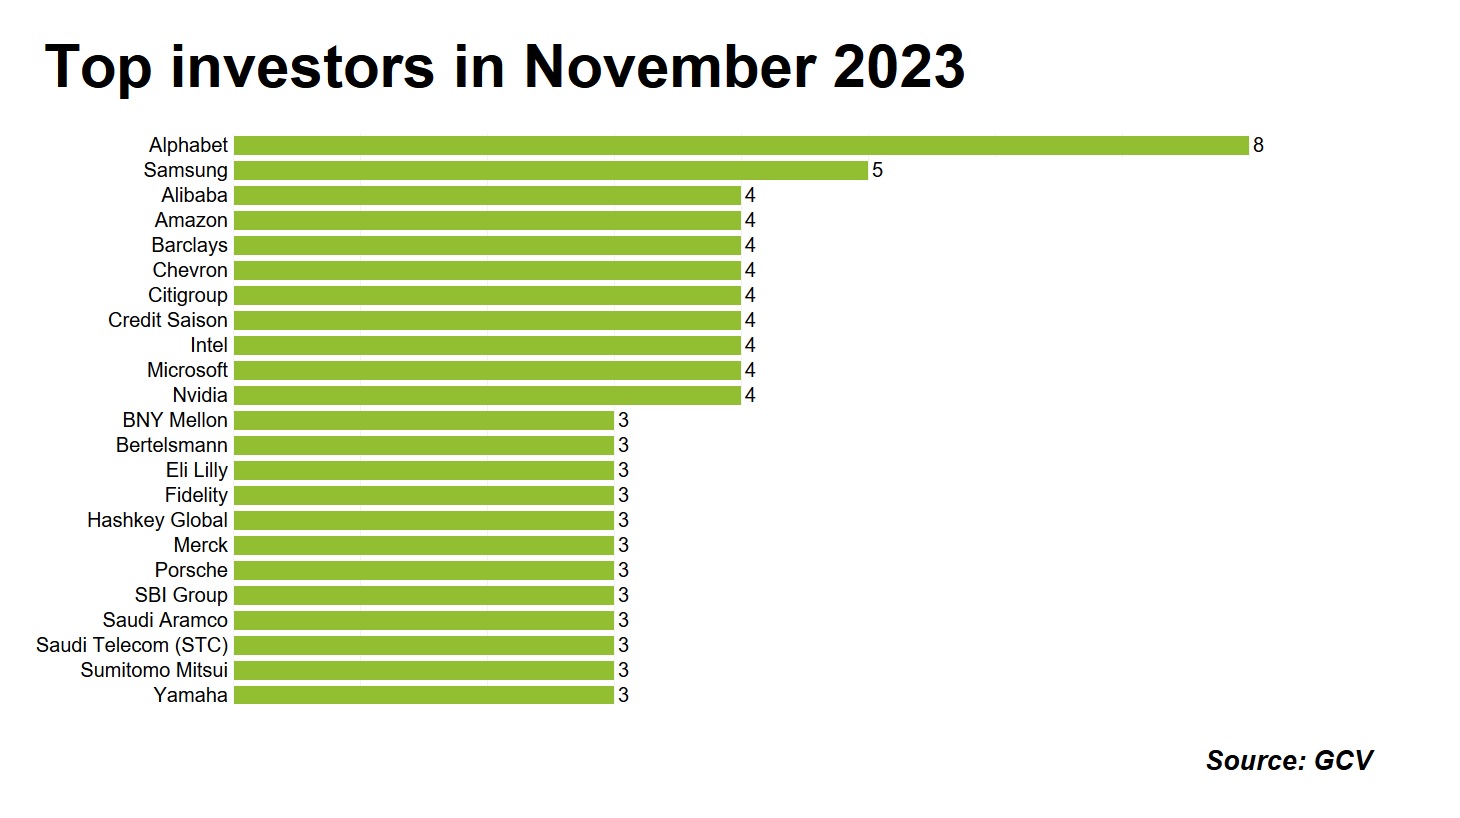 Top investors in November 2023 by number of investments. Source: GCV